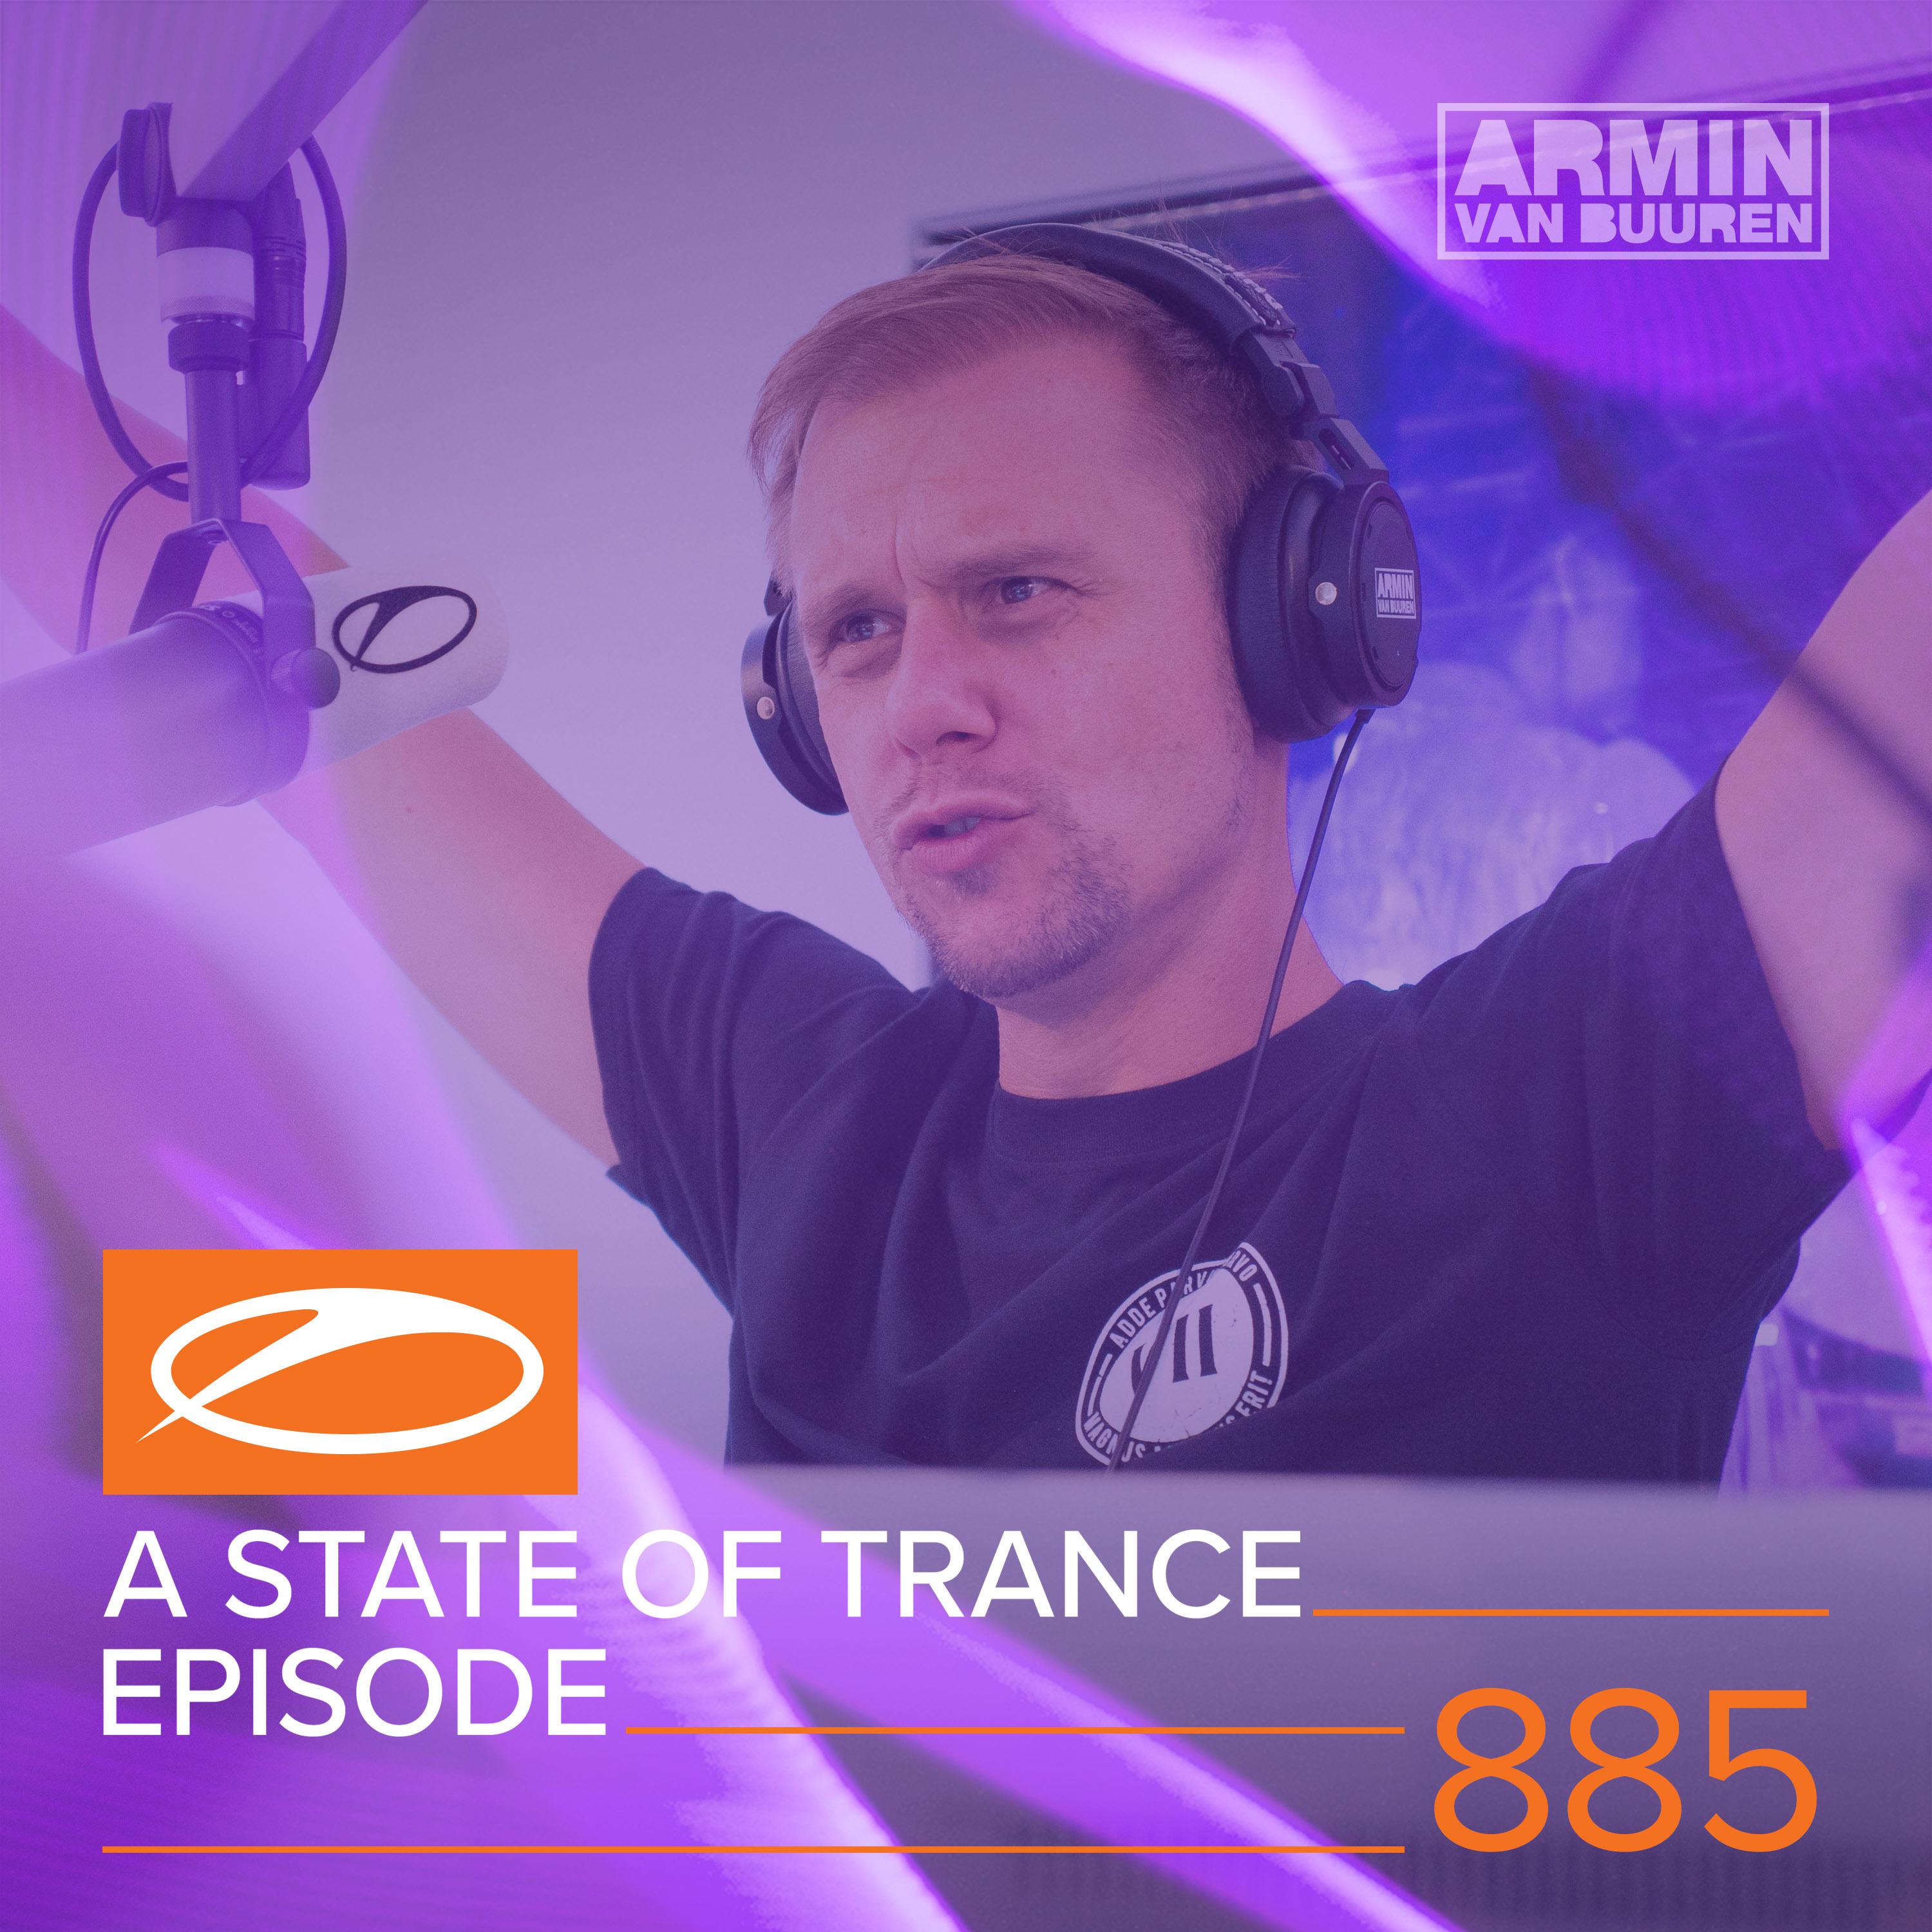 A State Of Trance (ASOT 885) (Track Recap, Pt. 1)